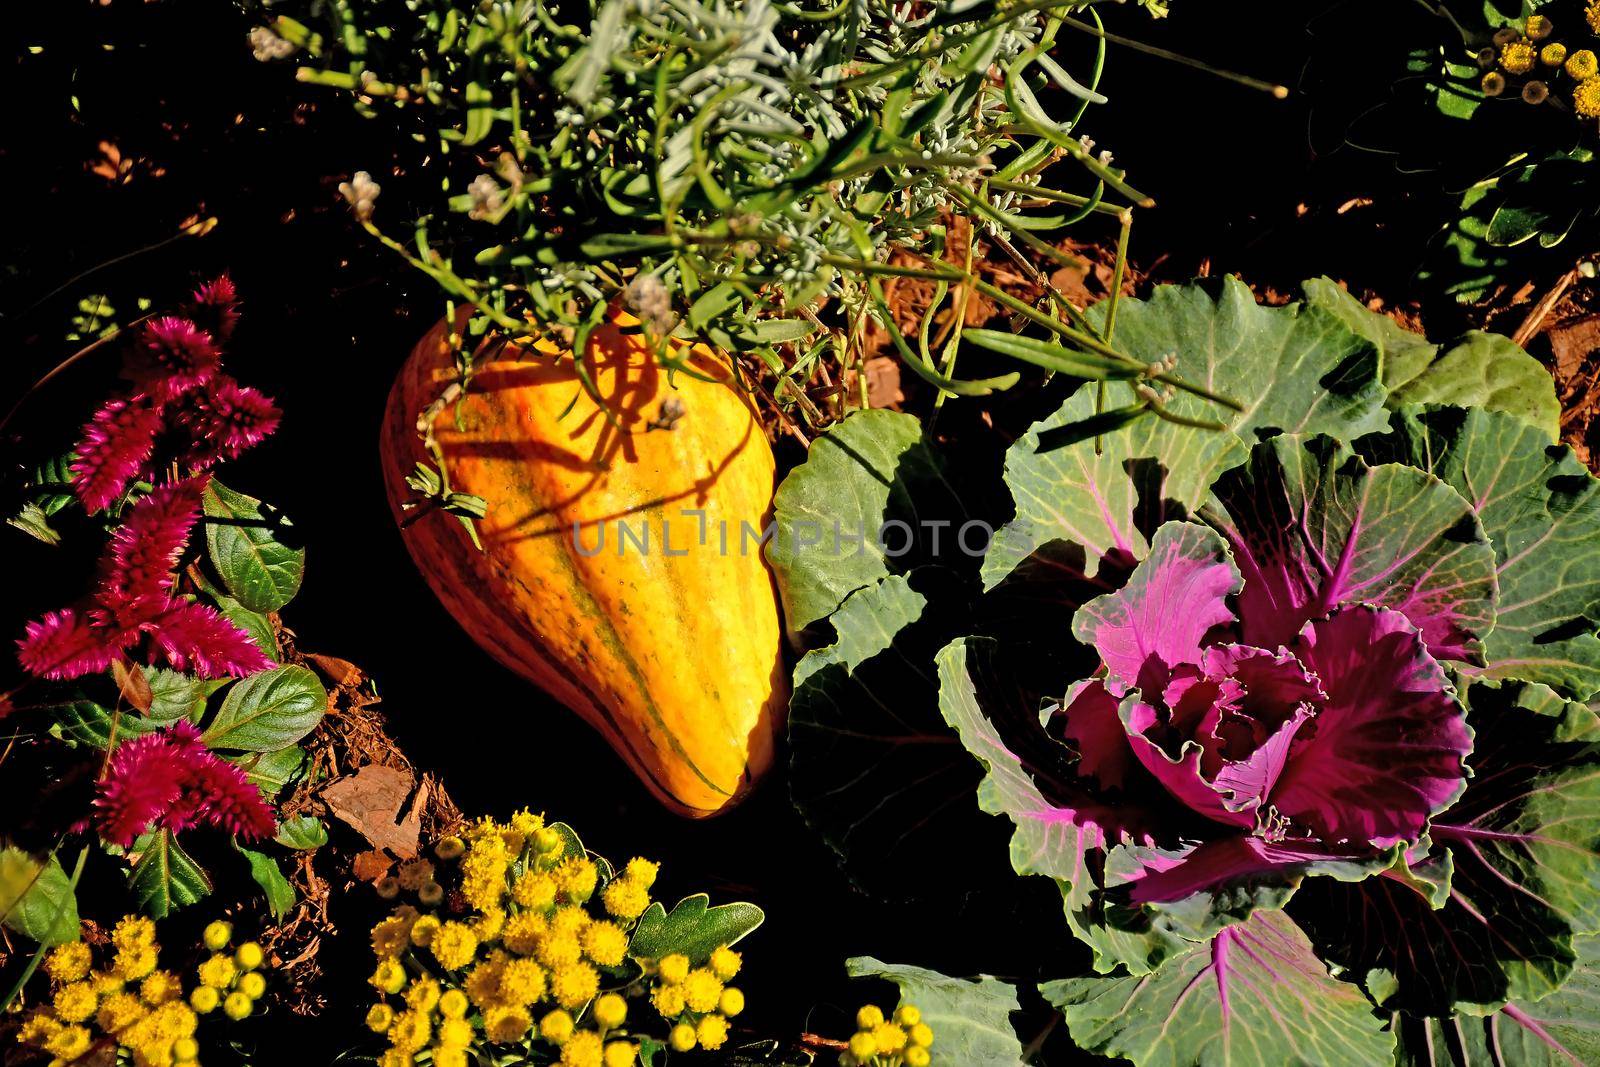 autumnal decorated garden with flowers and squash by Jochen